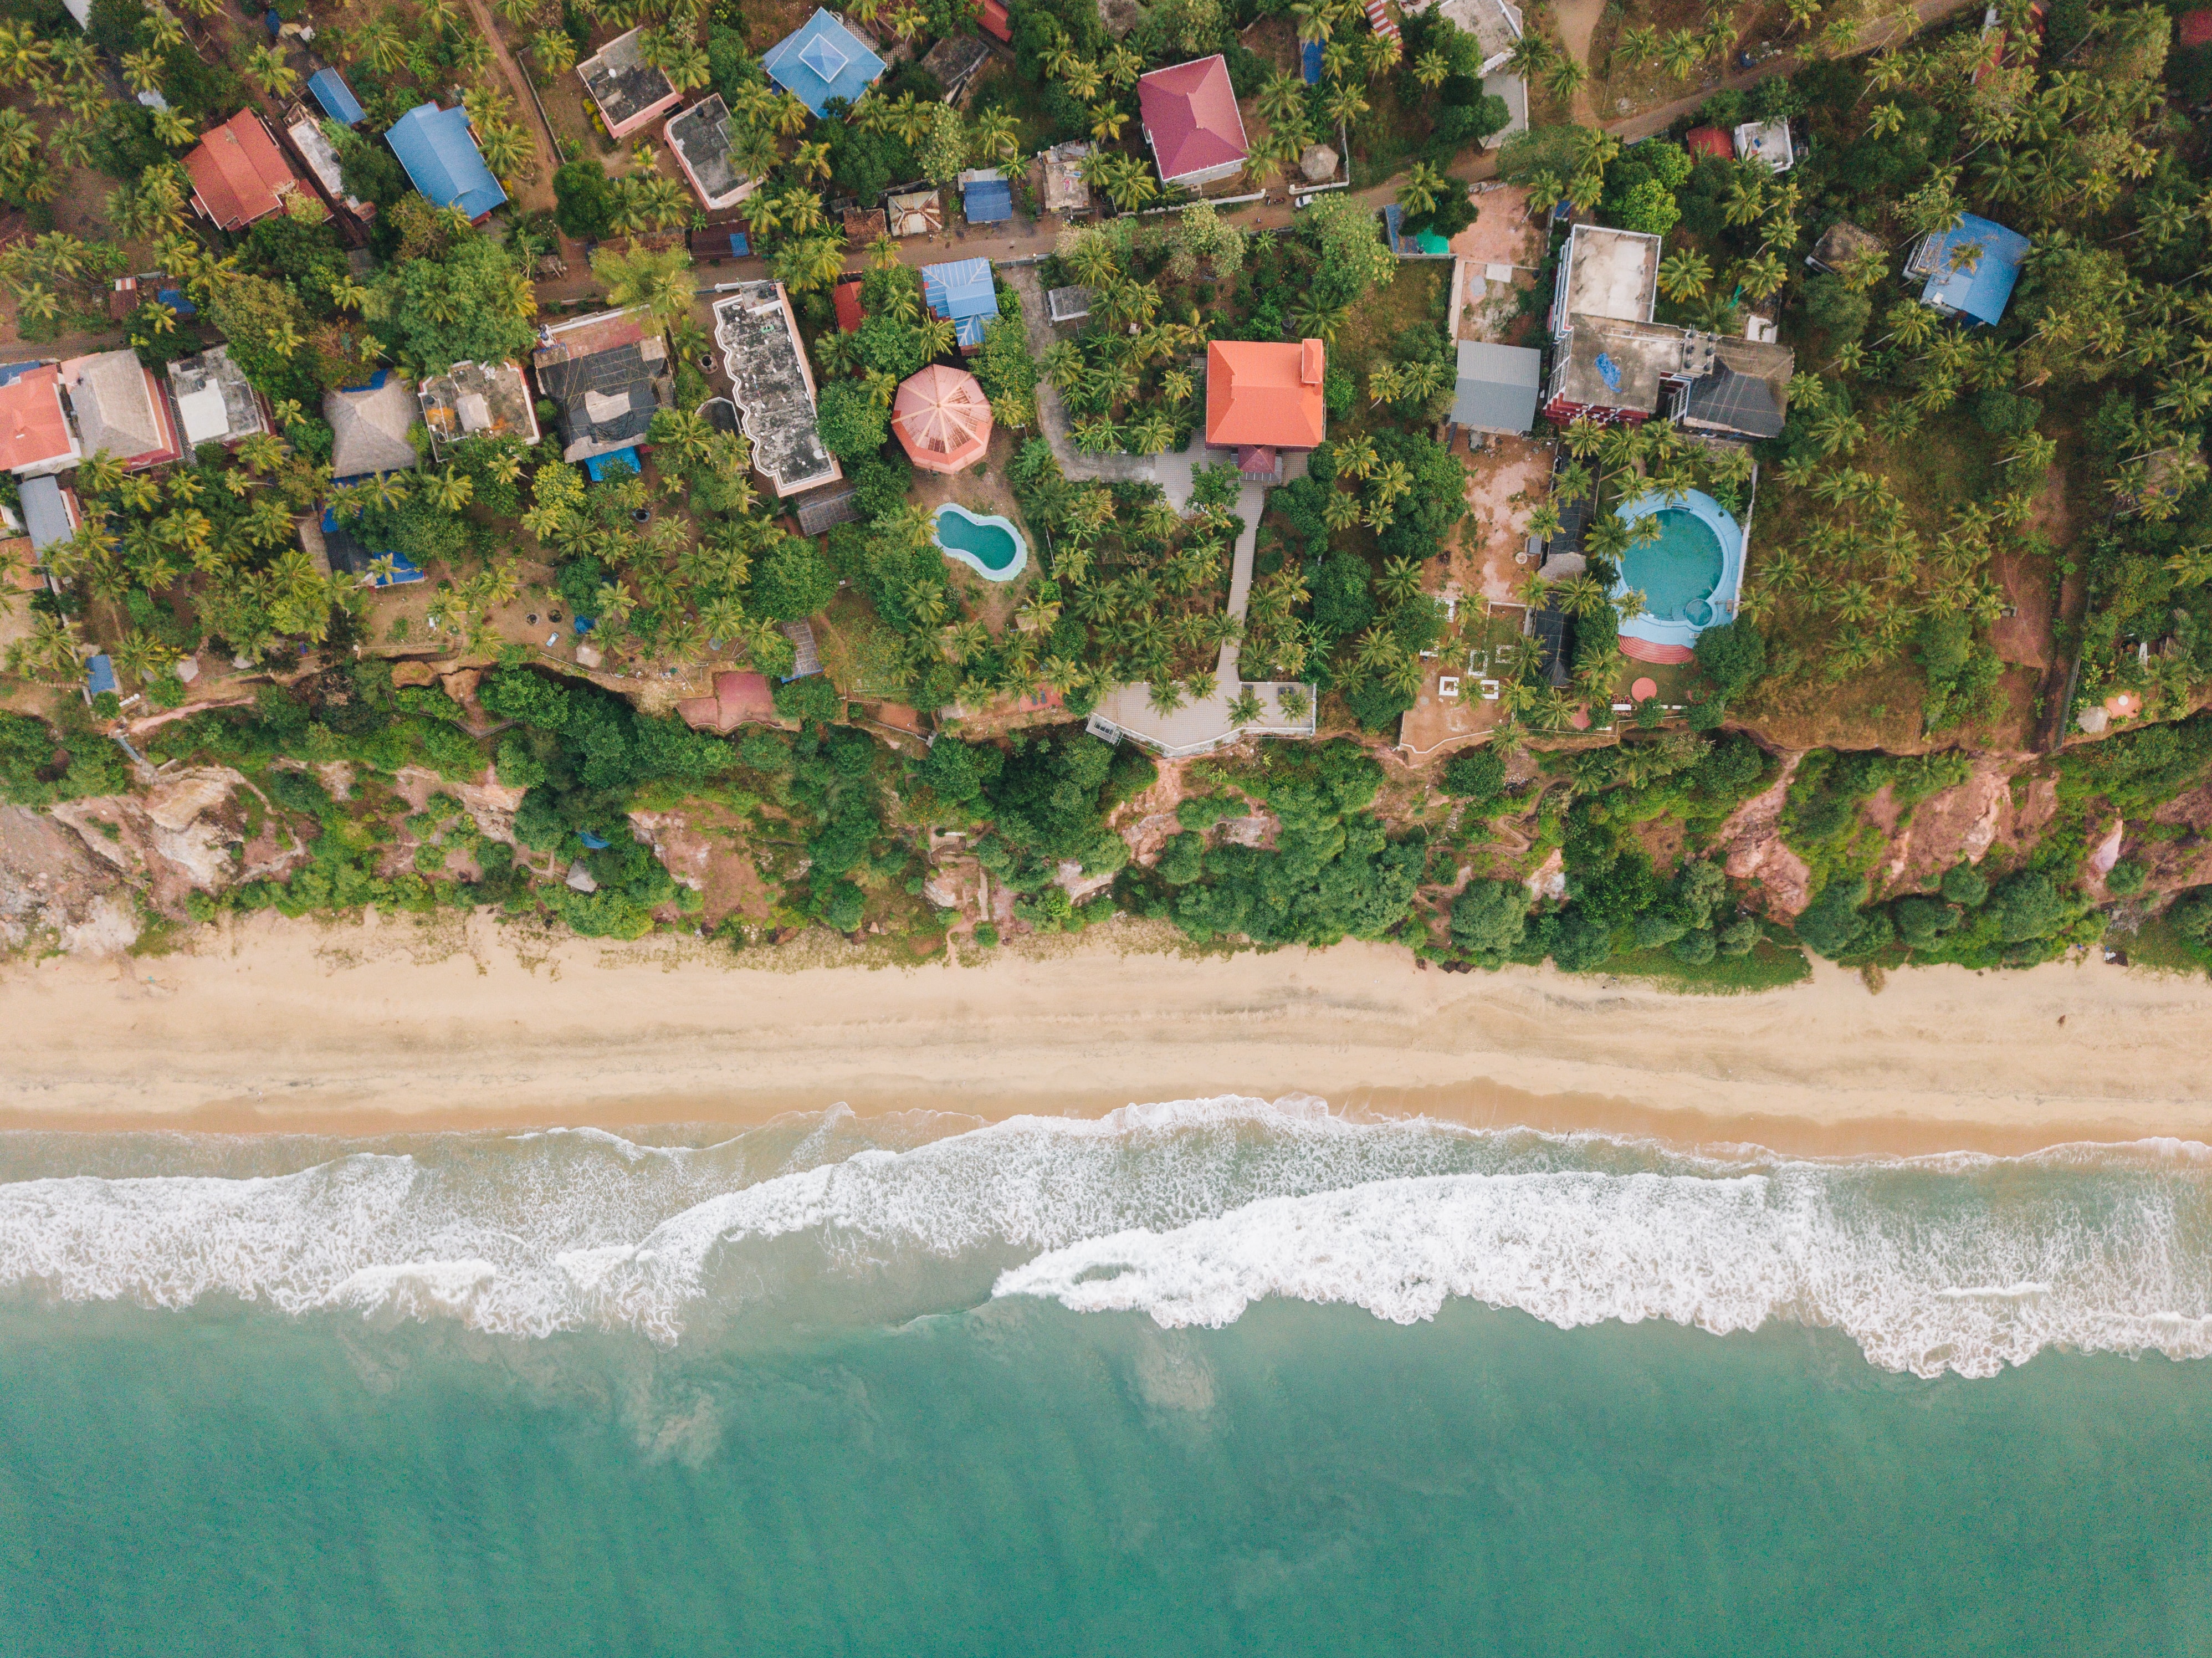 shore, view from above, nature, beach, palms, building, bank 32K